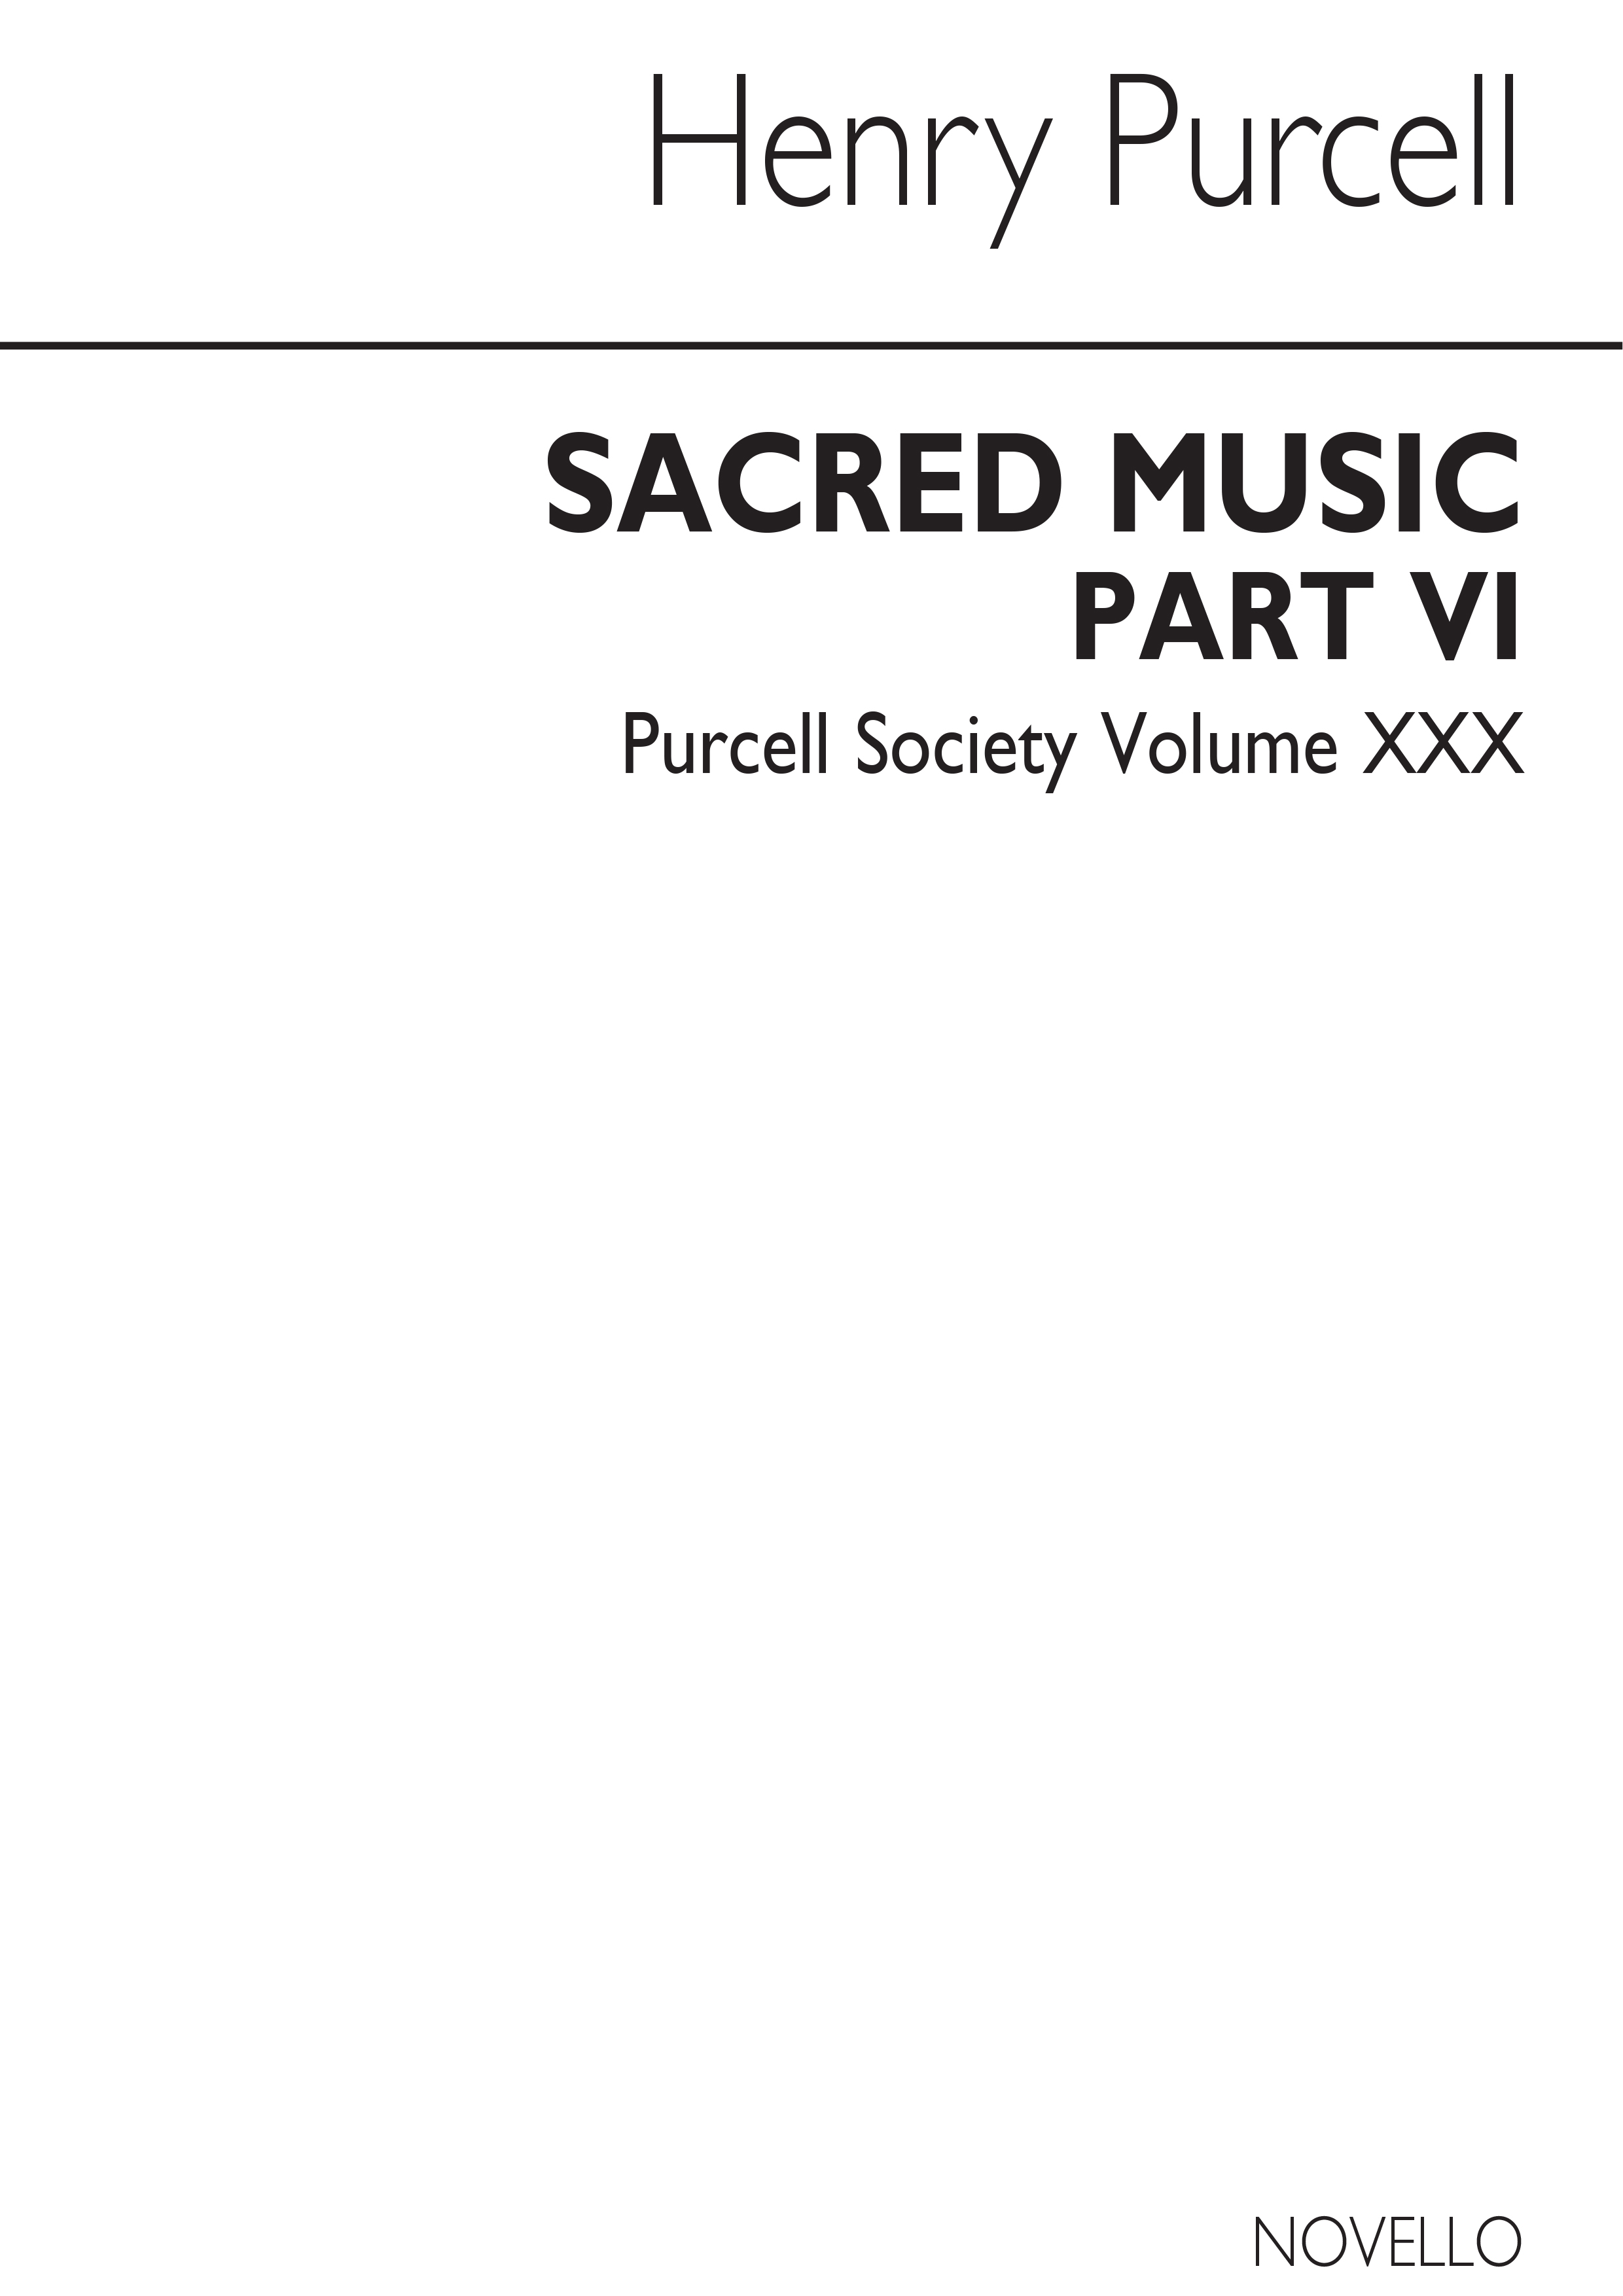 Purcell Society Volume 30 - Sacred Music Part 6 (Original Engraving)